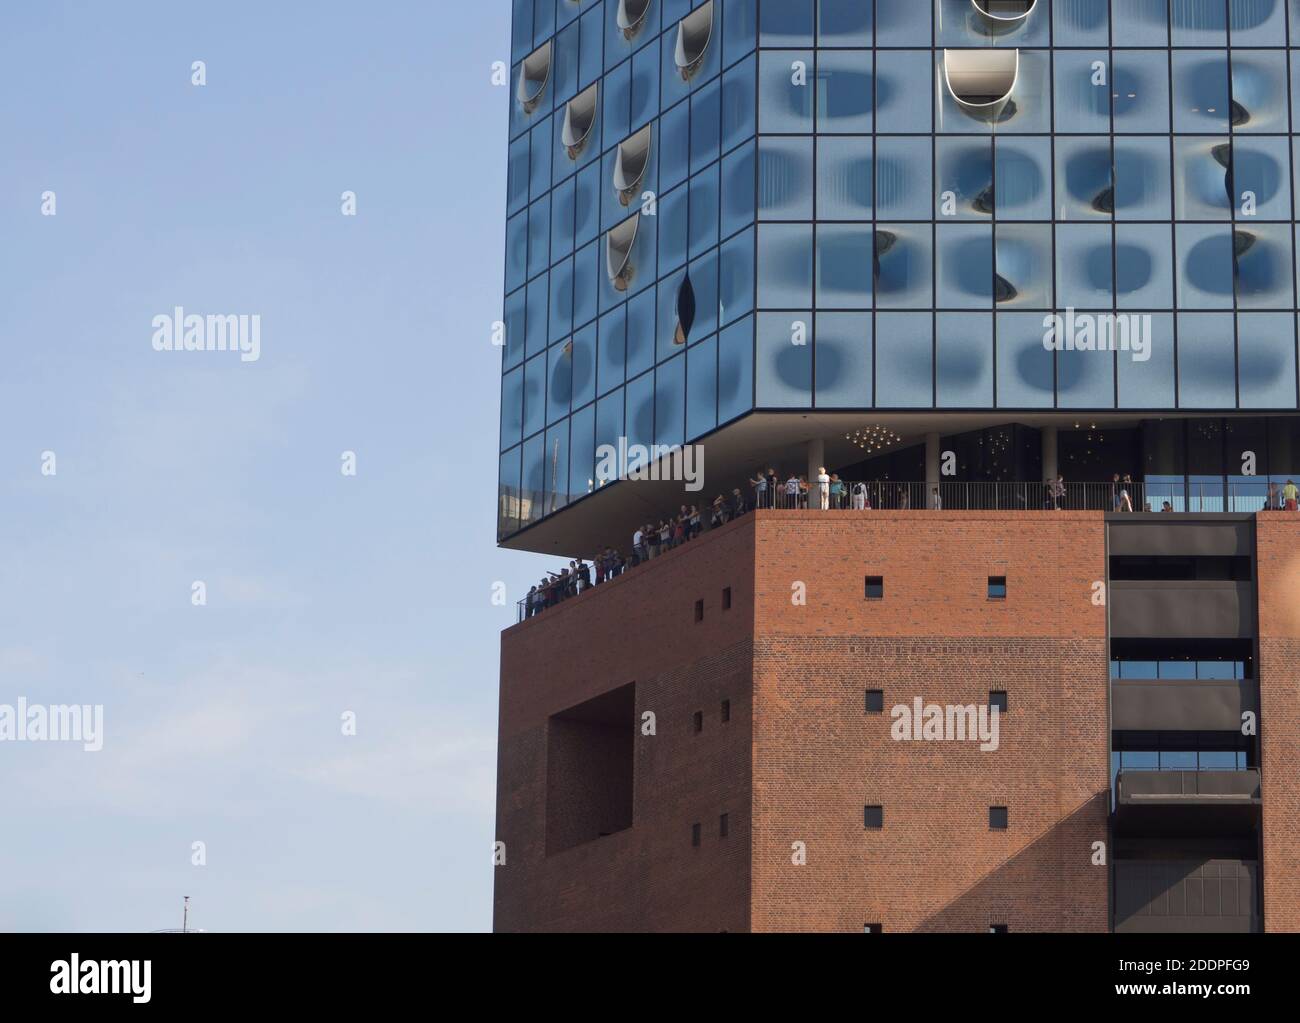 Elbphilharmonie, modern concert hall in Hamburg Germany by the architectHerzog & de Neuron, detail of facade with viewing balcony Stock Photo